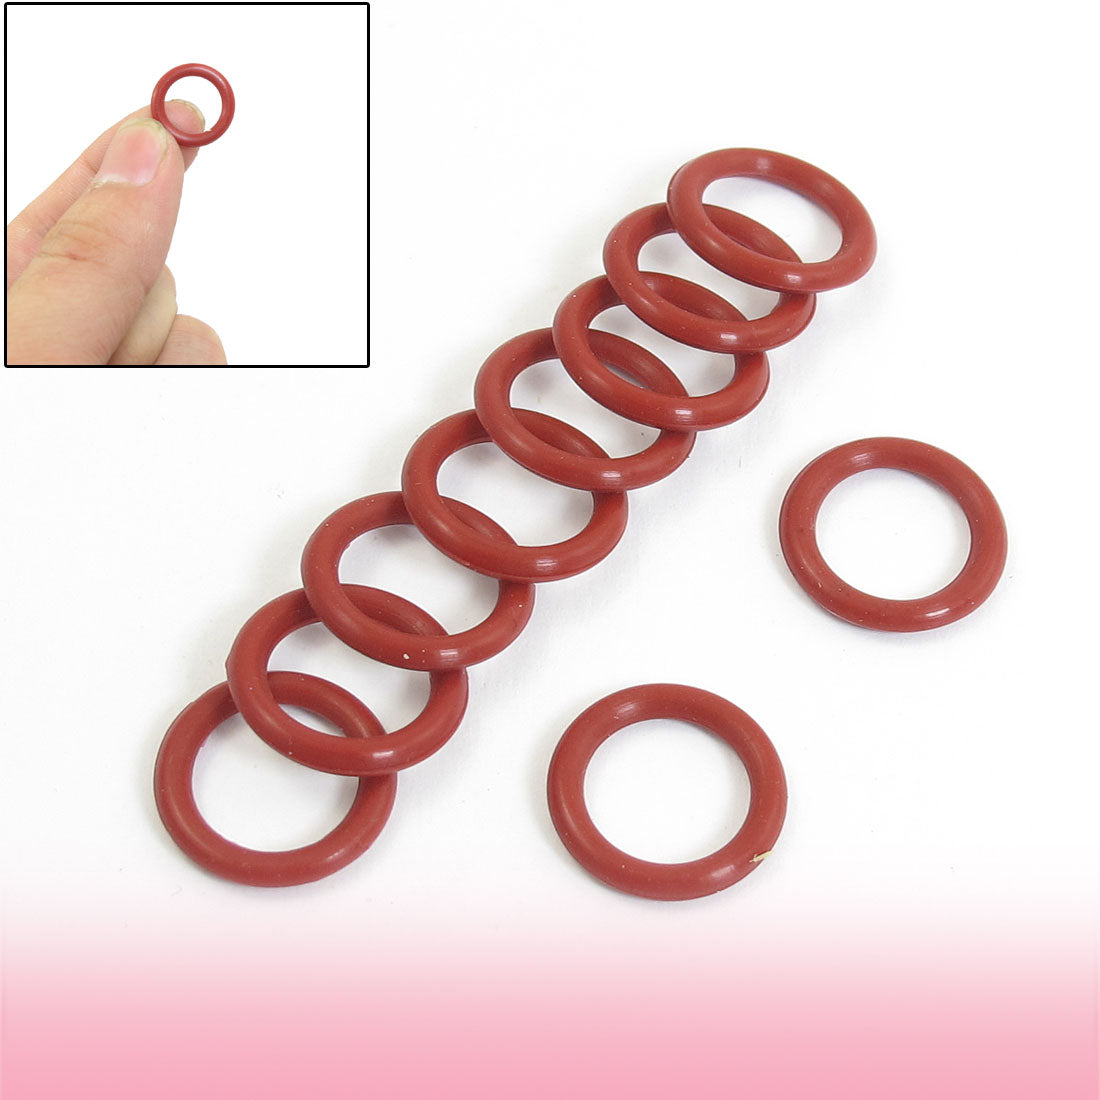 uxcell Uxcell 10 Pcs Red Rubber 16mm x 2.5mm Oil Seal O Rings Gaskets Washers